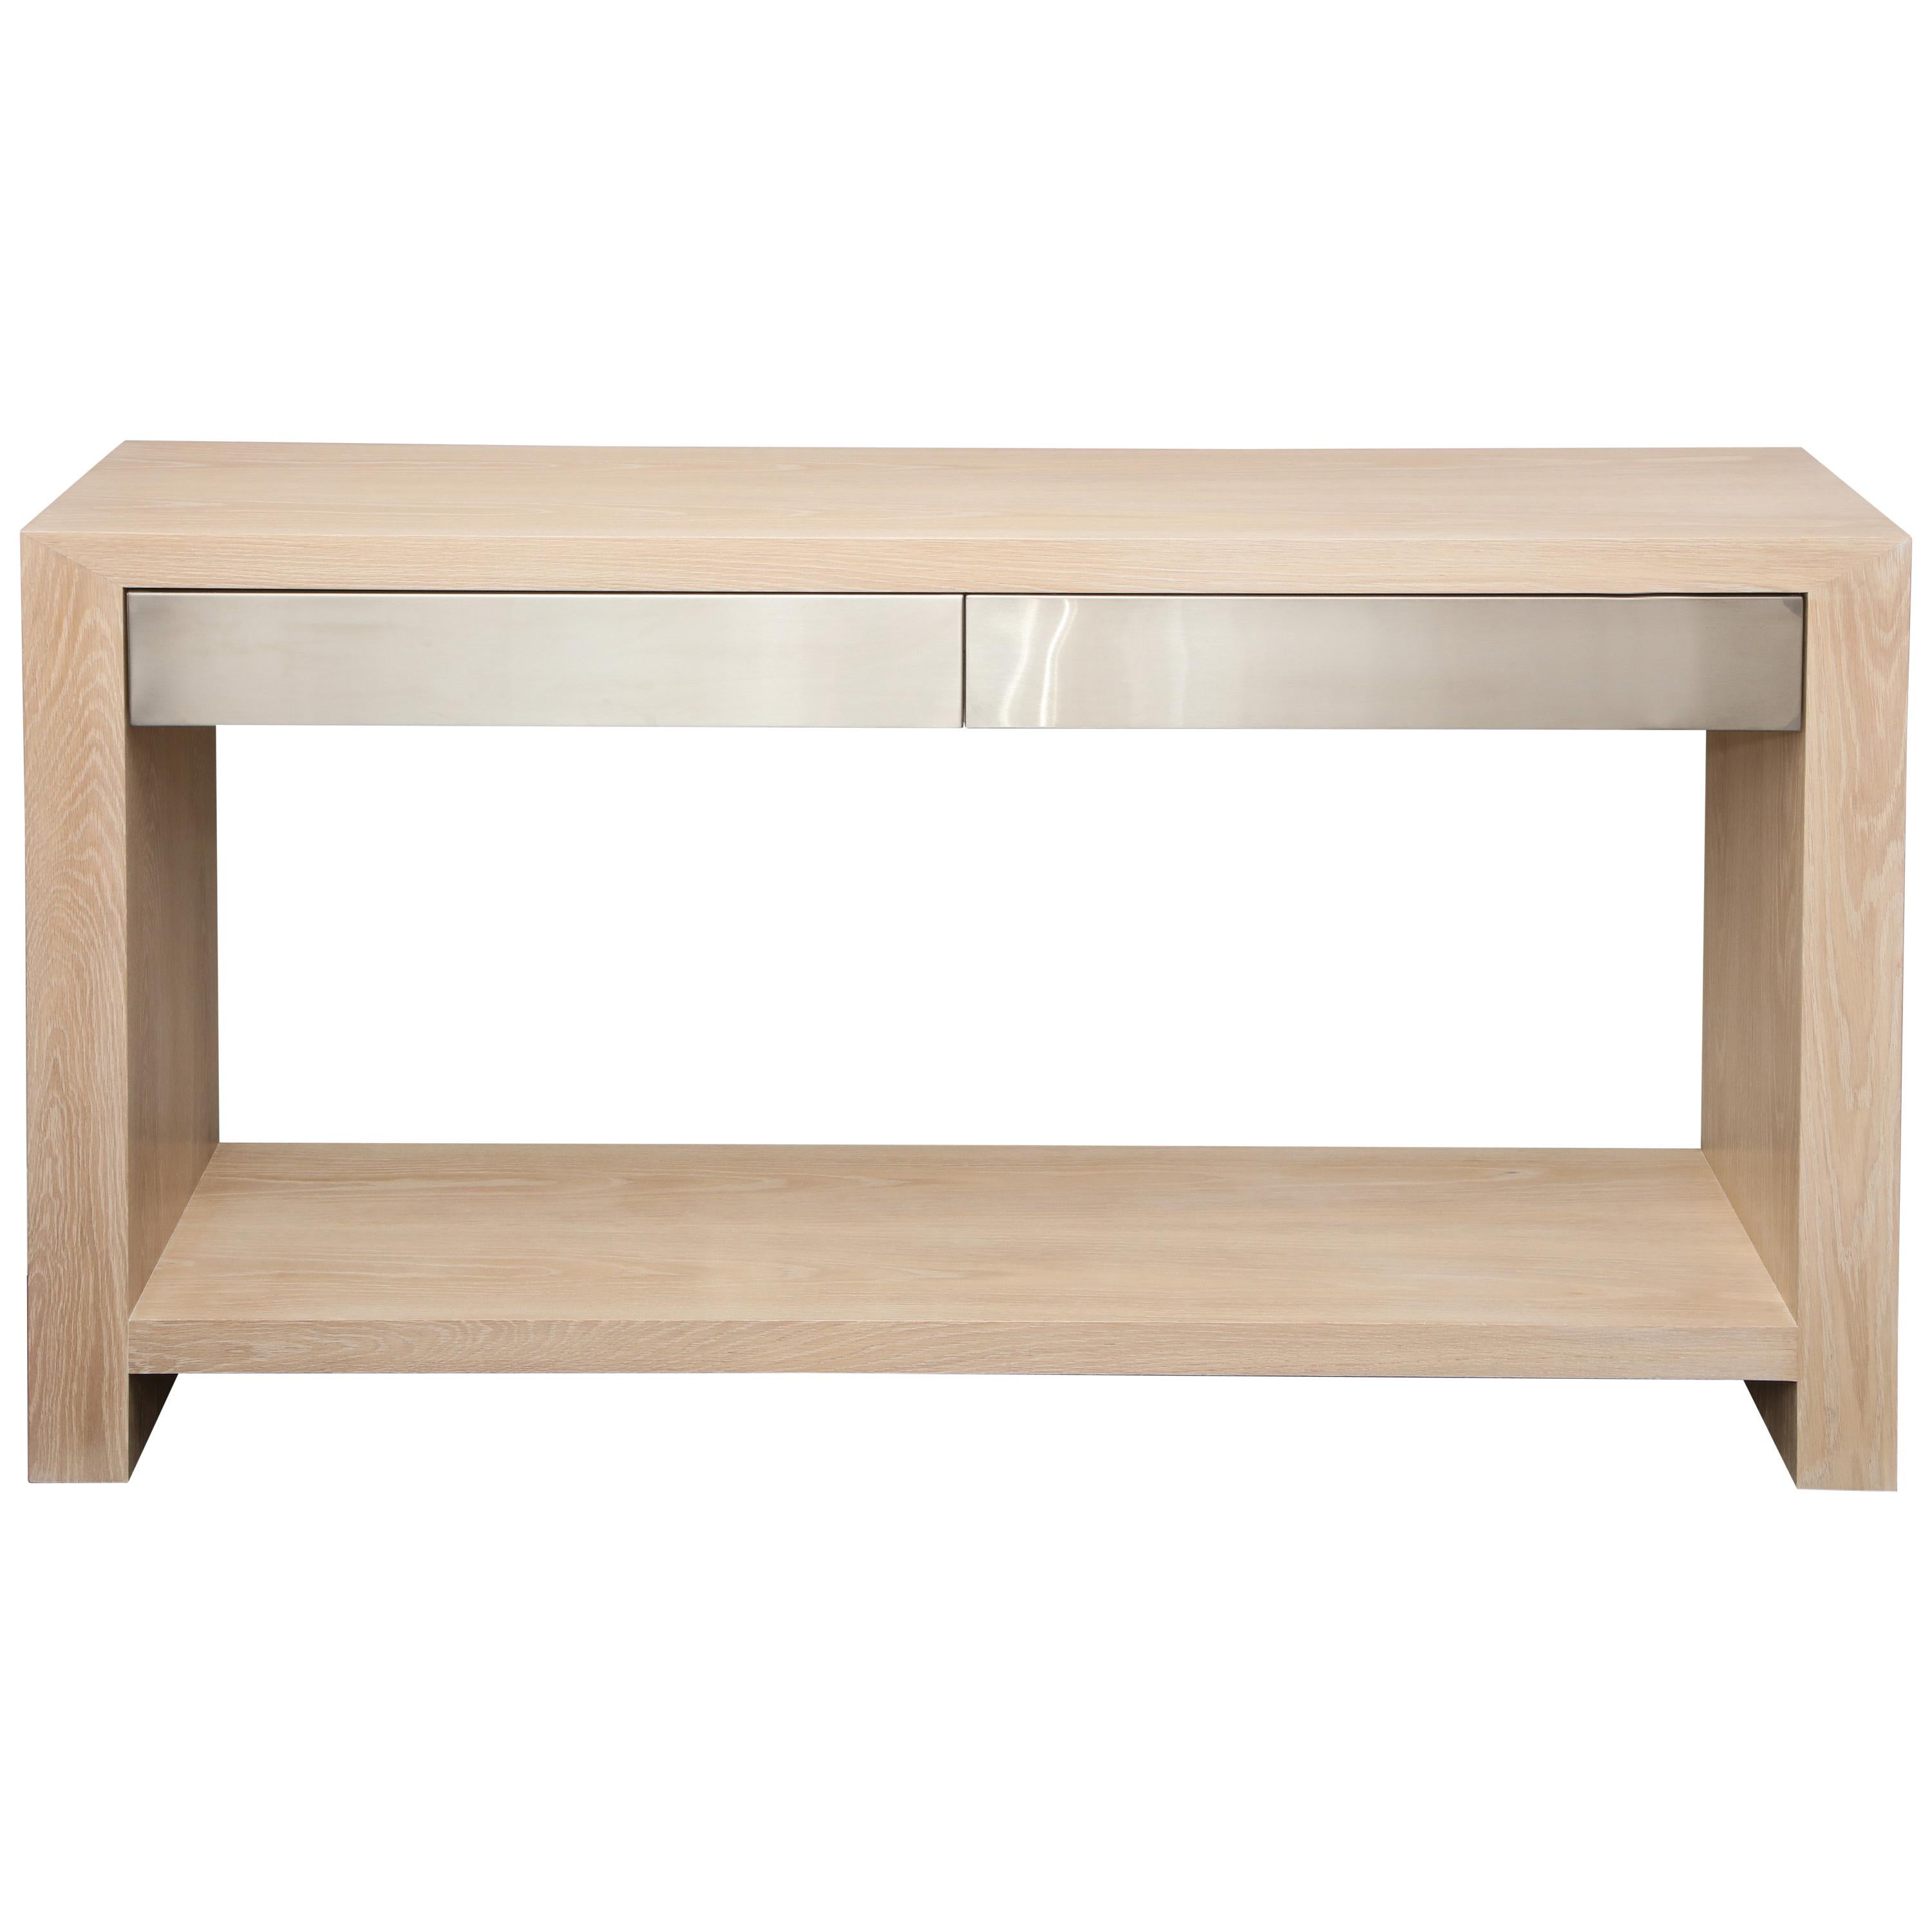 Bleached Oak Console with Brushed Stainless Steel Drawers